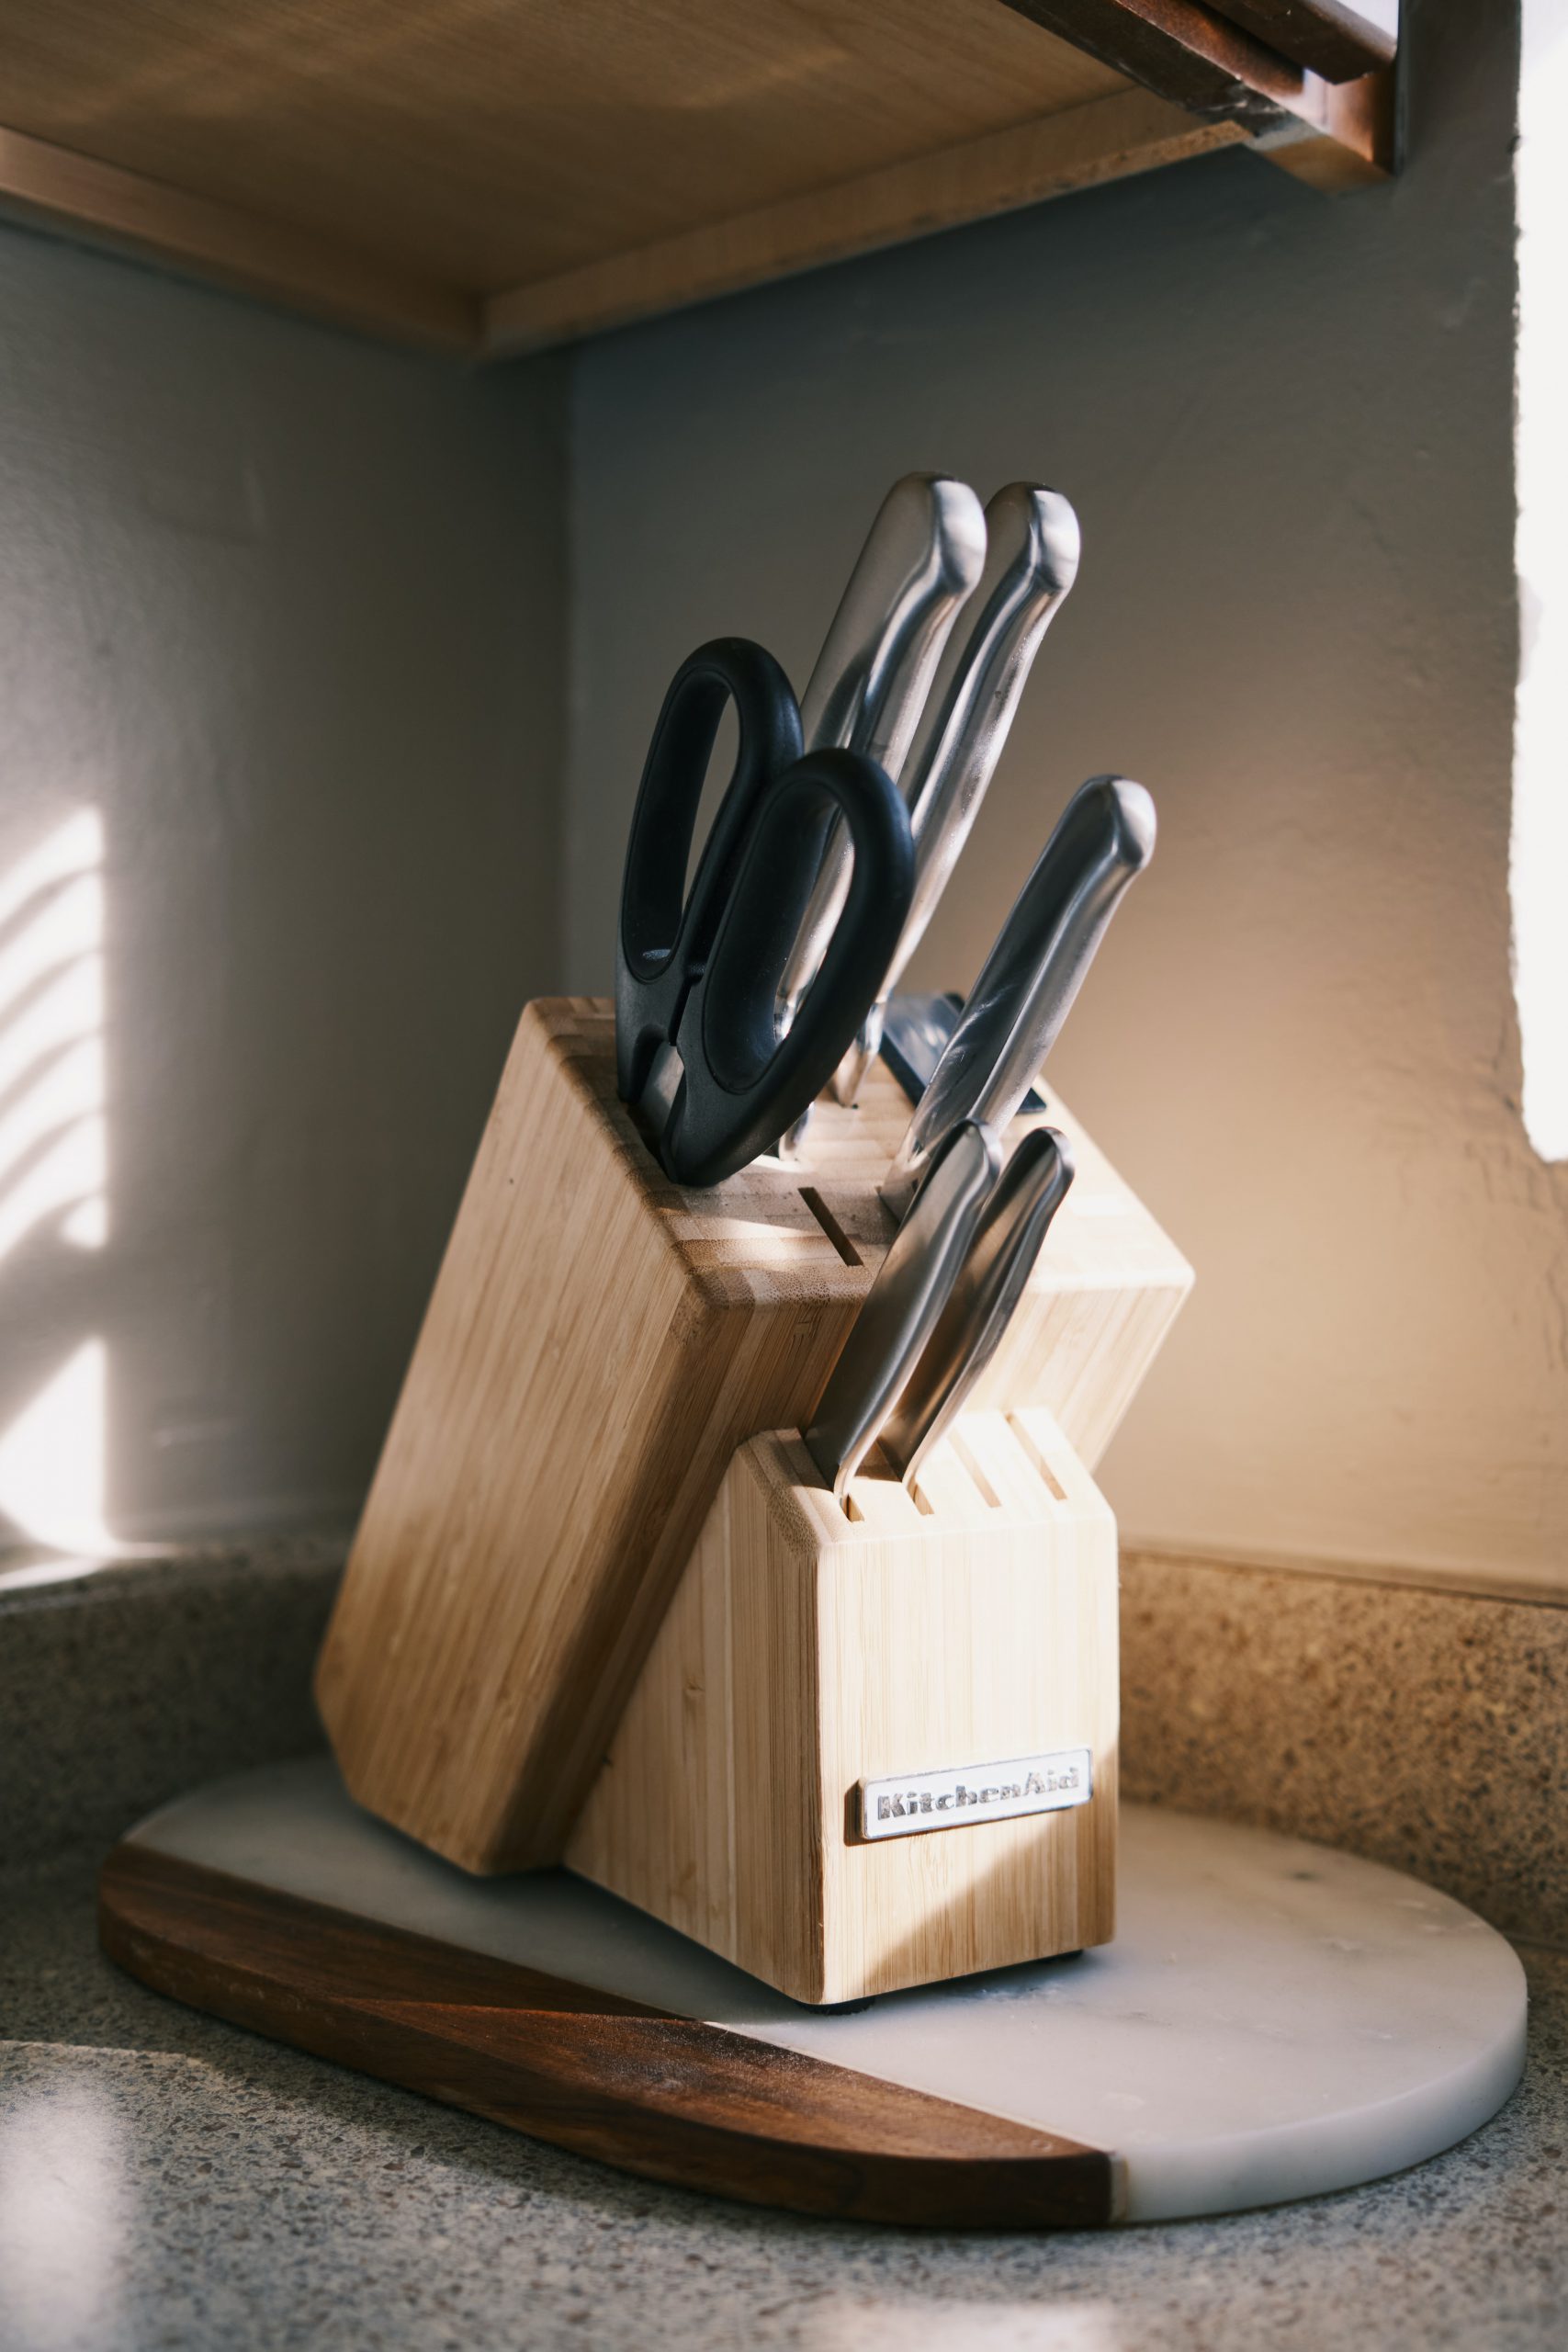 How to store your knives the right way - CNET